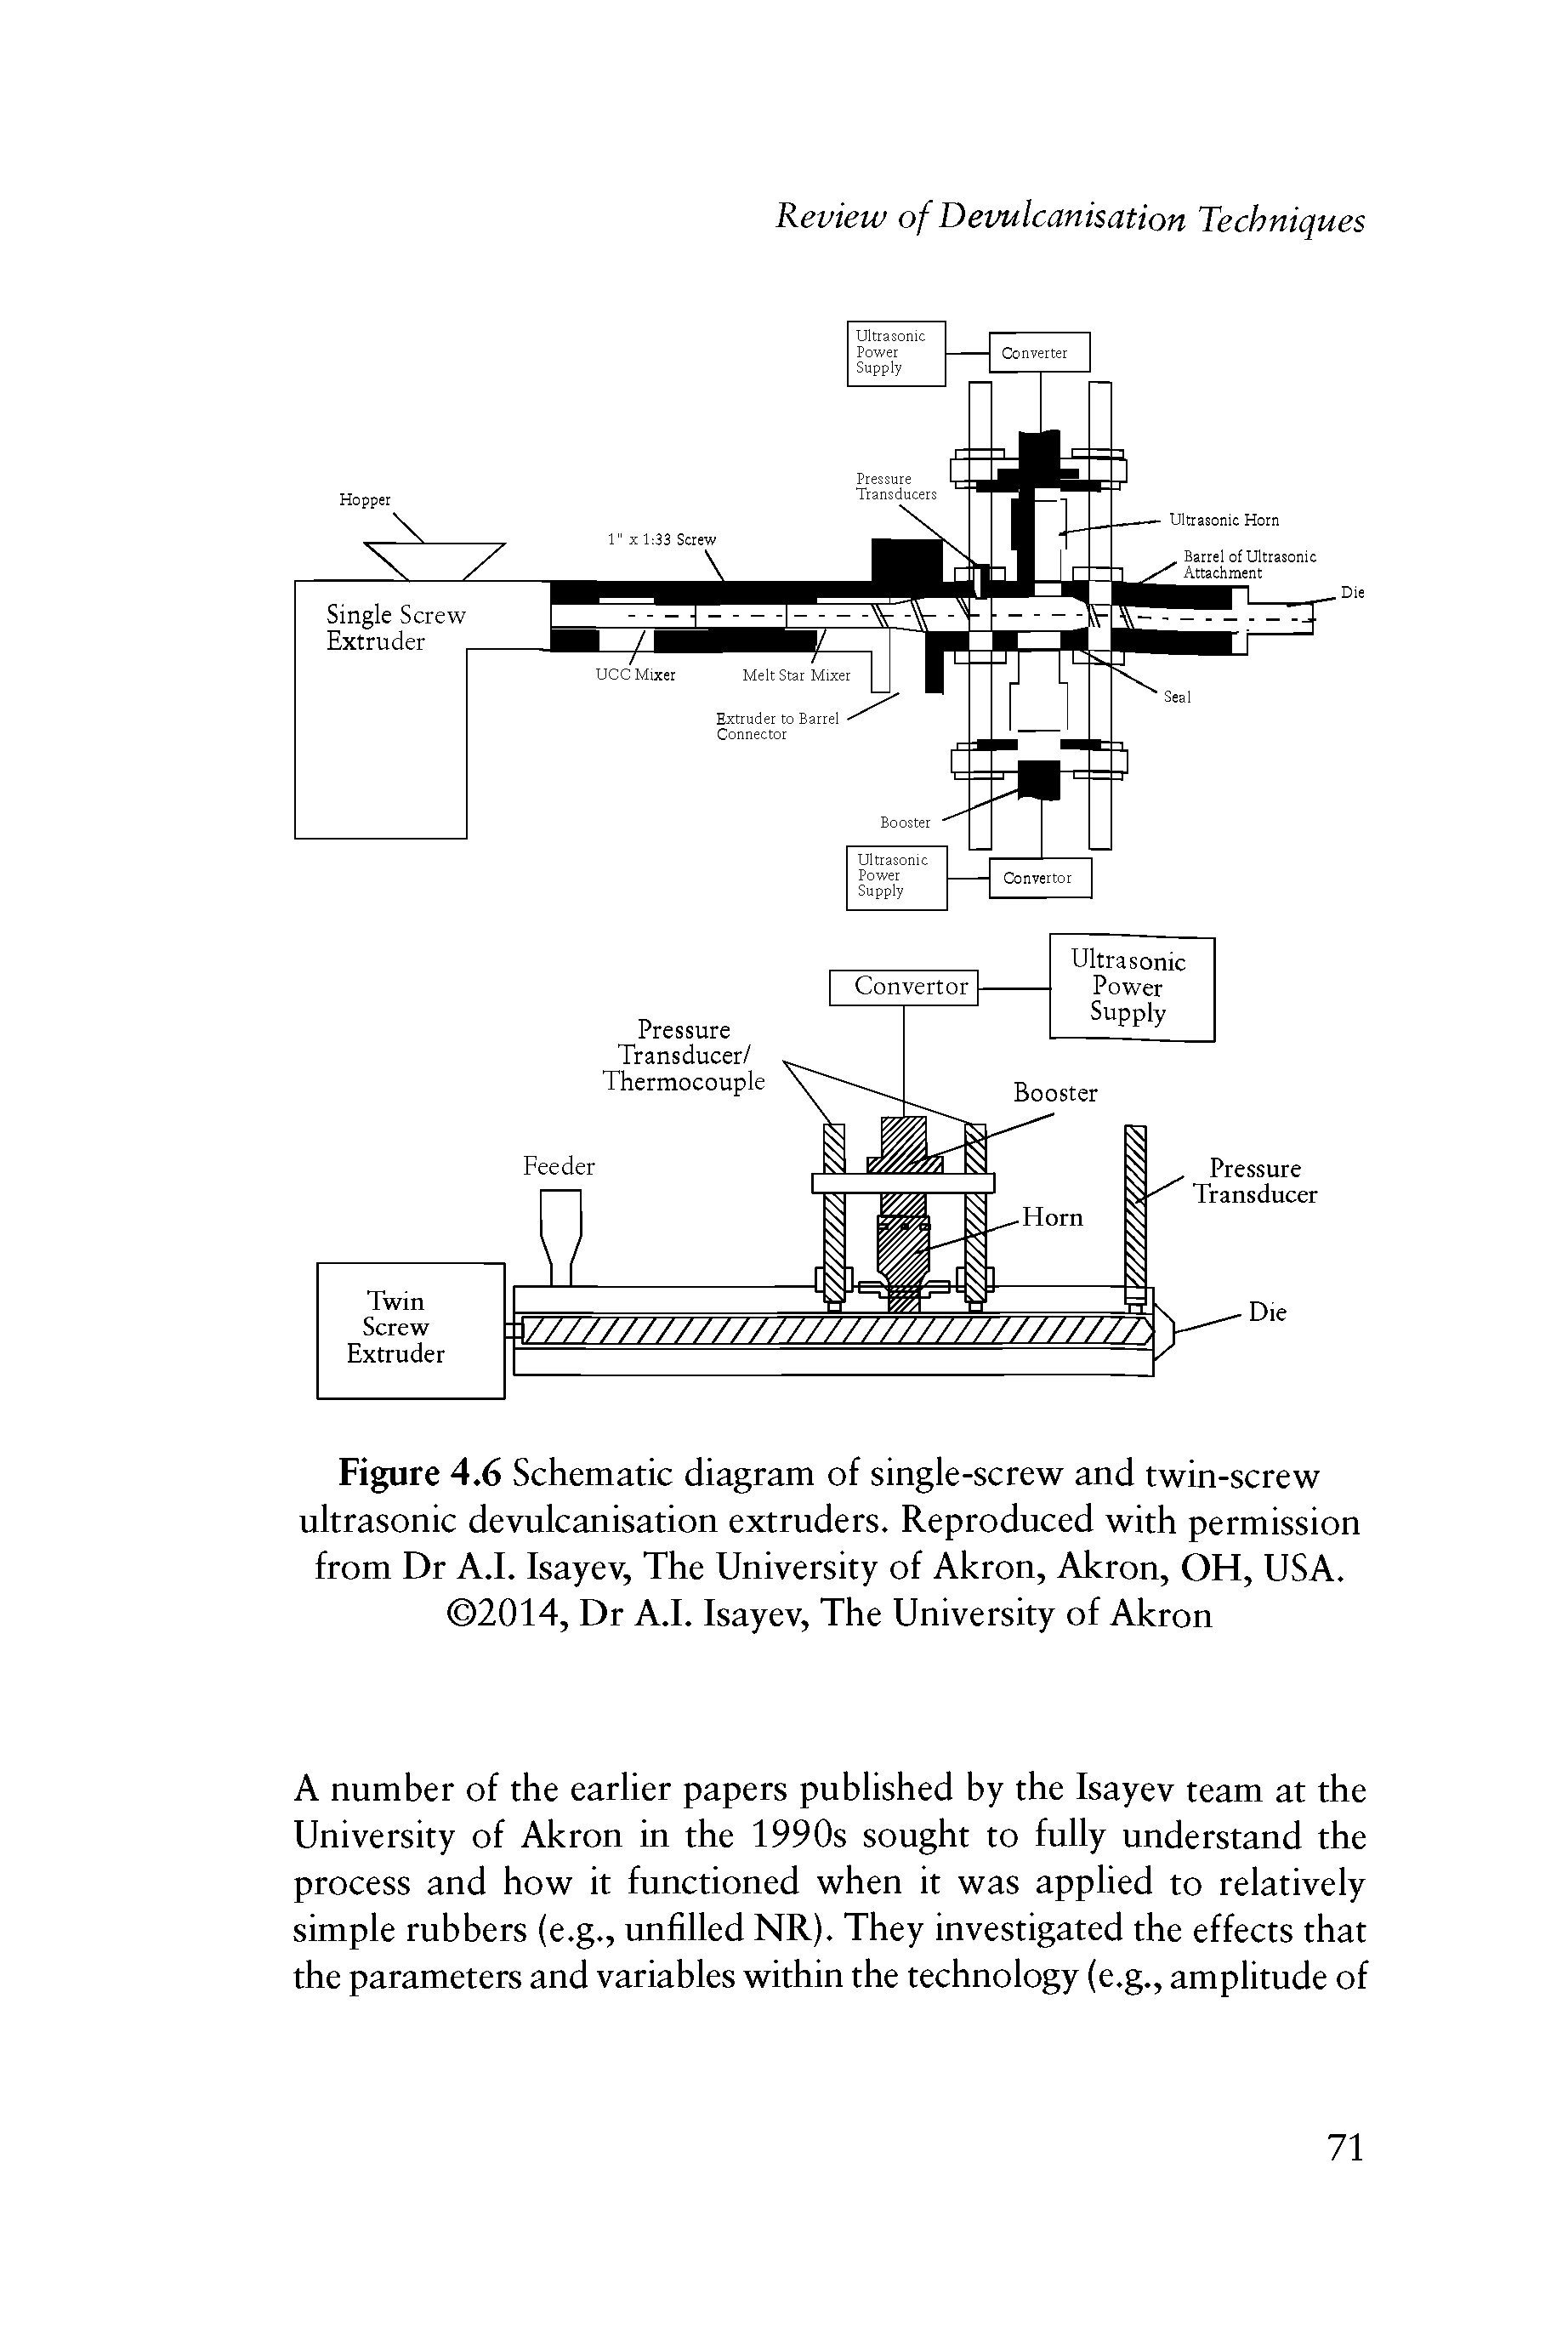 Figure 4.6 Schematic diagram of single-screw and twin-screw ultrasonic devulcanisation extruders. Reproduced with permission from Dr A.L Isayev, The University of Akron, Akron, OH, USA. 2014, Dr A.I. Isayev, The University of Akron...